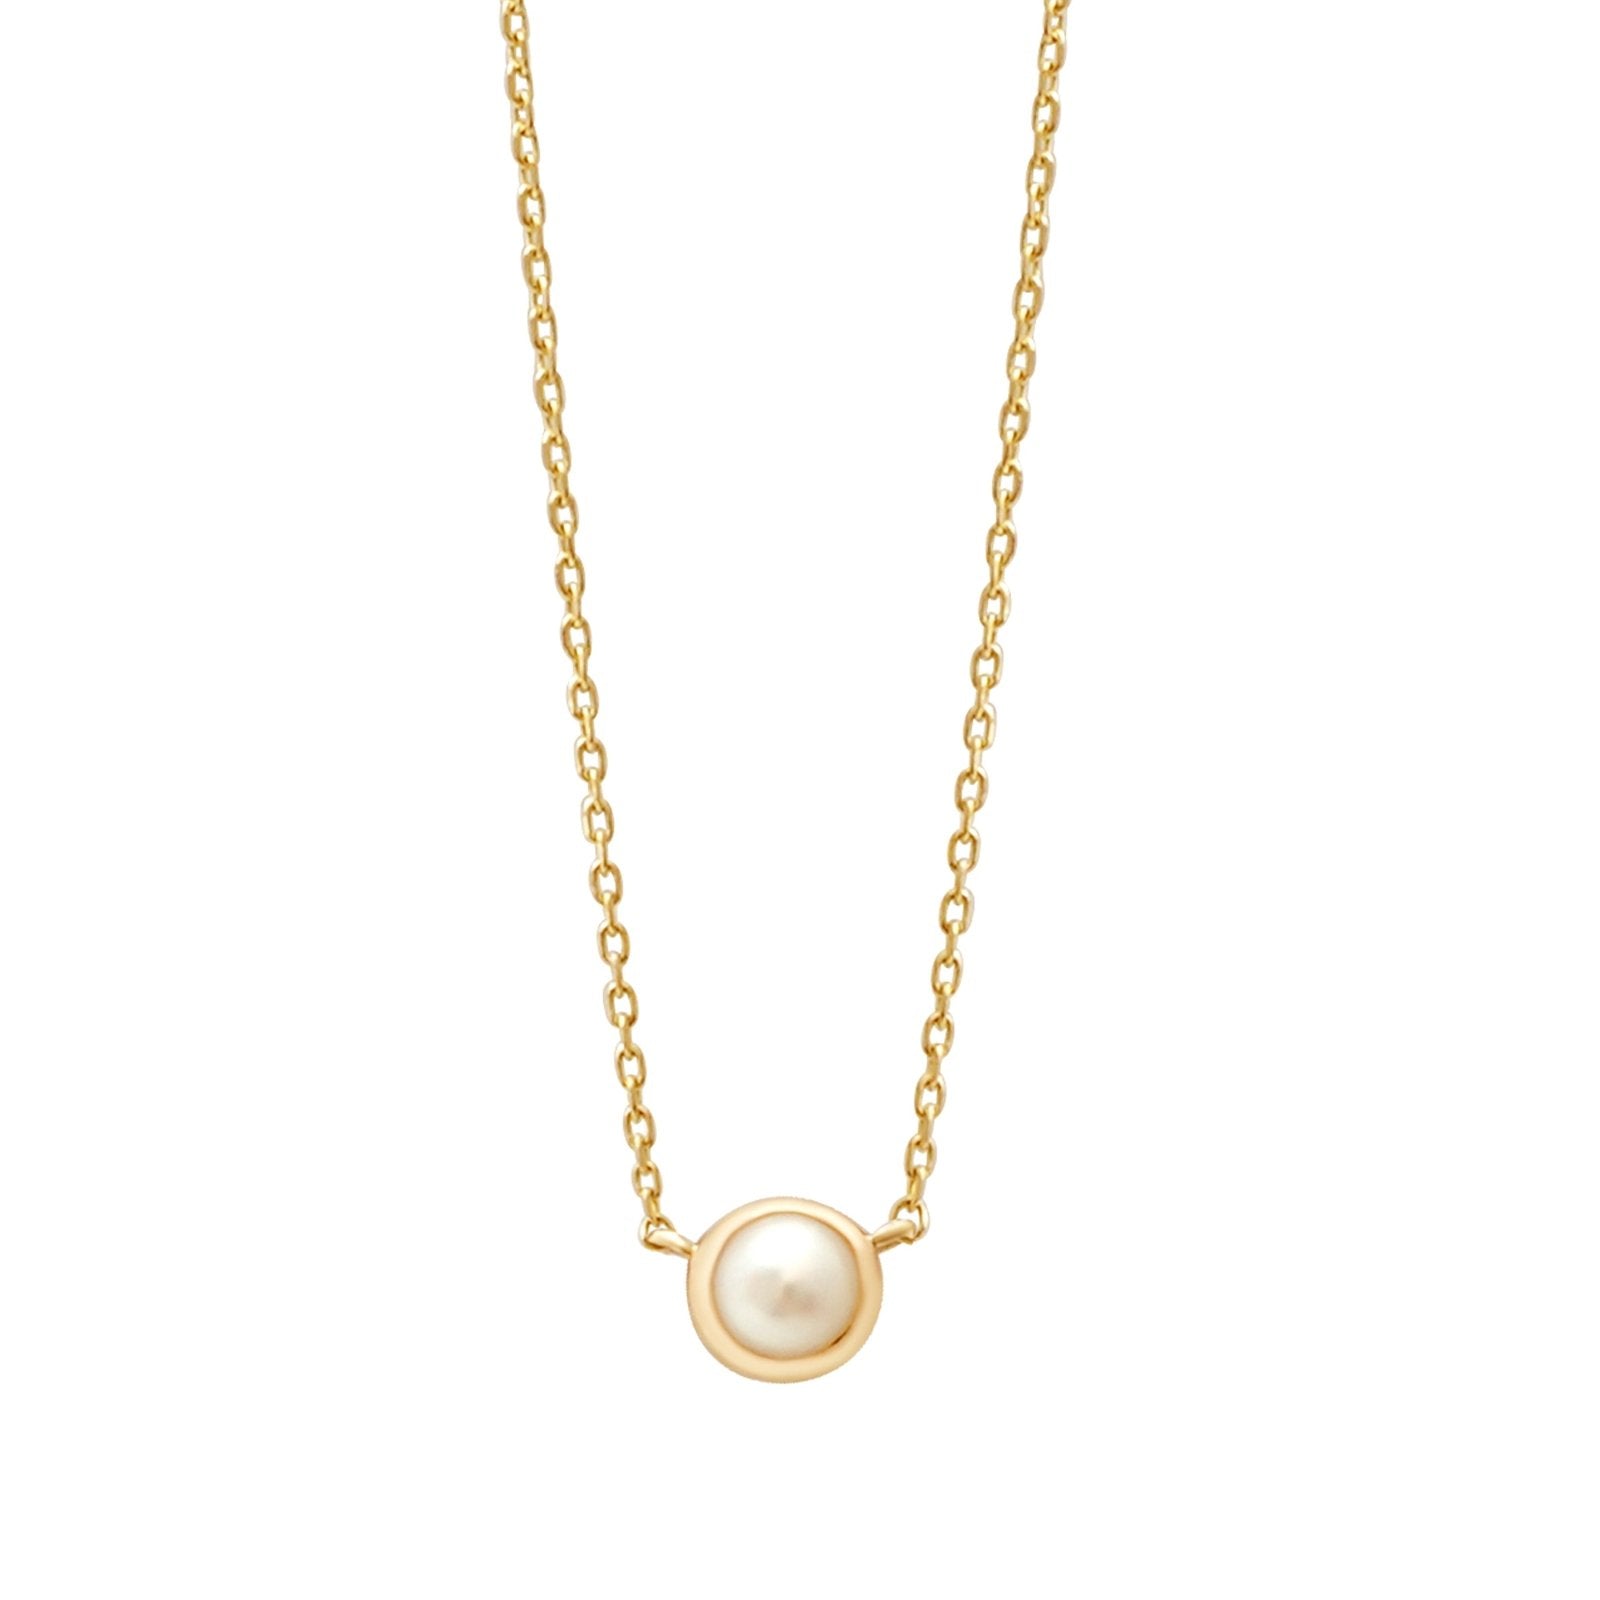 Freshwater Pearl Station Necklace Bezel Set in 14k Gold Necklaces Estella Collection #product_description# 18411 14k Birthstone Gemstone #tag4# #tag5# #tag6# #tag7# #tag8# #tag9# #tag10# 3MM